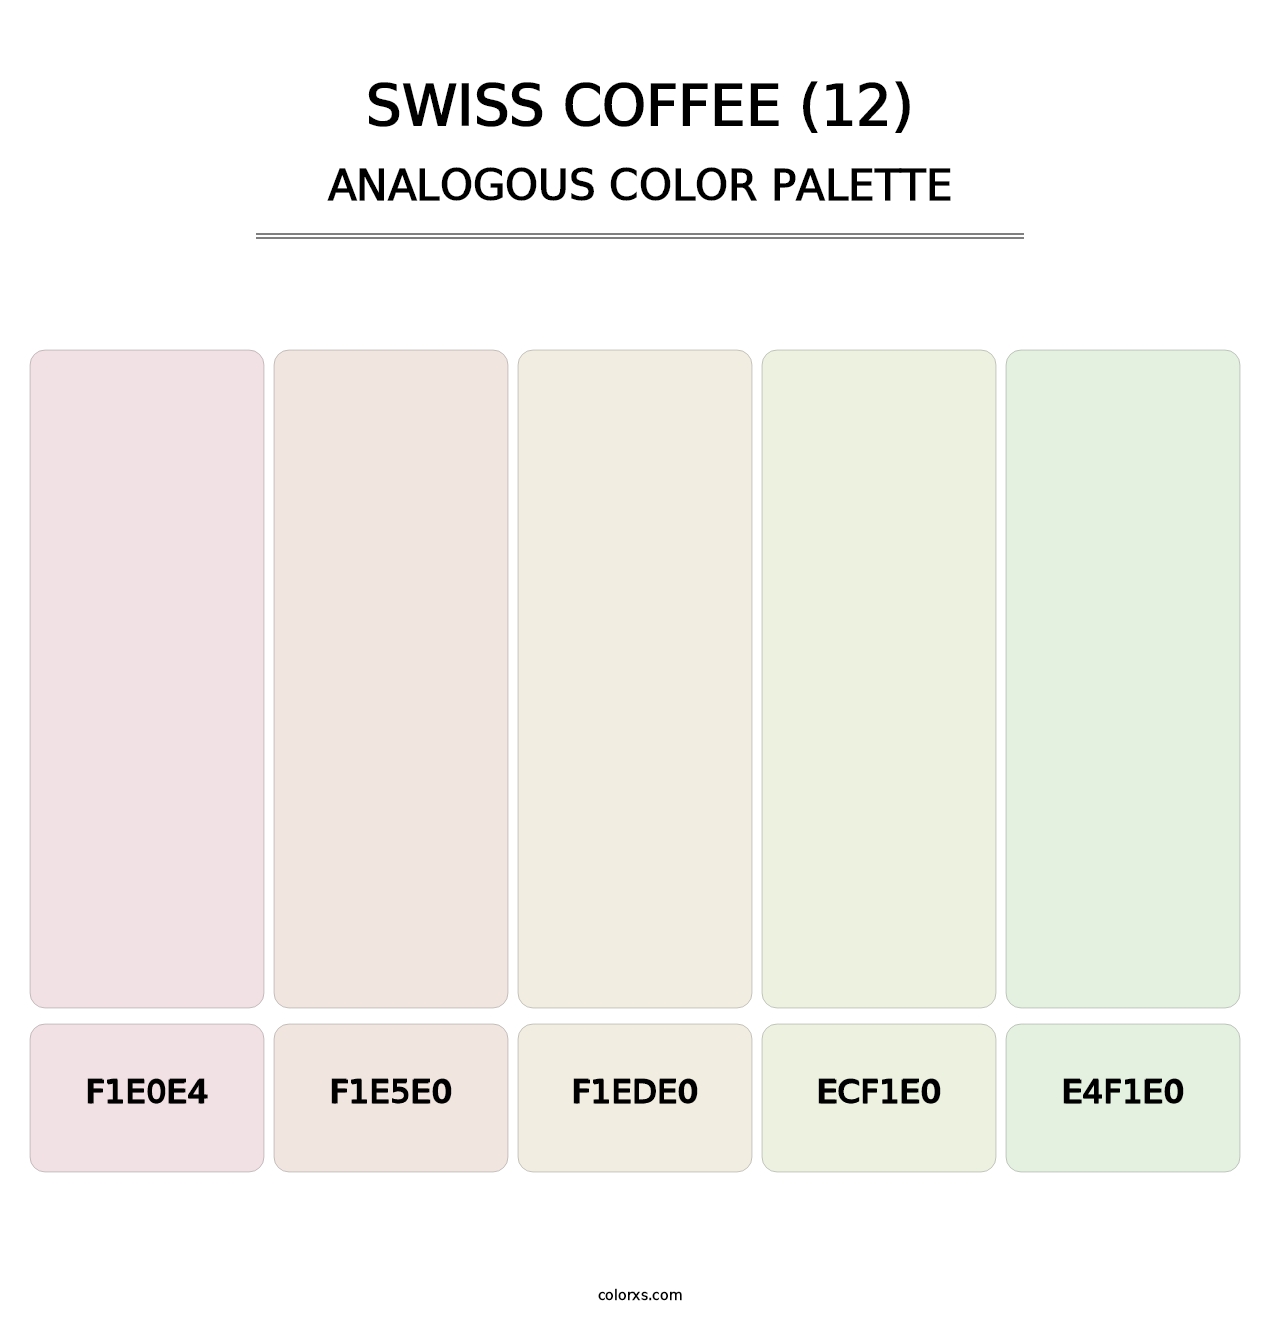 Swiss Coffee (12) - Analogous Color Palette